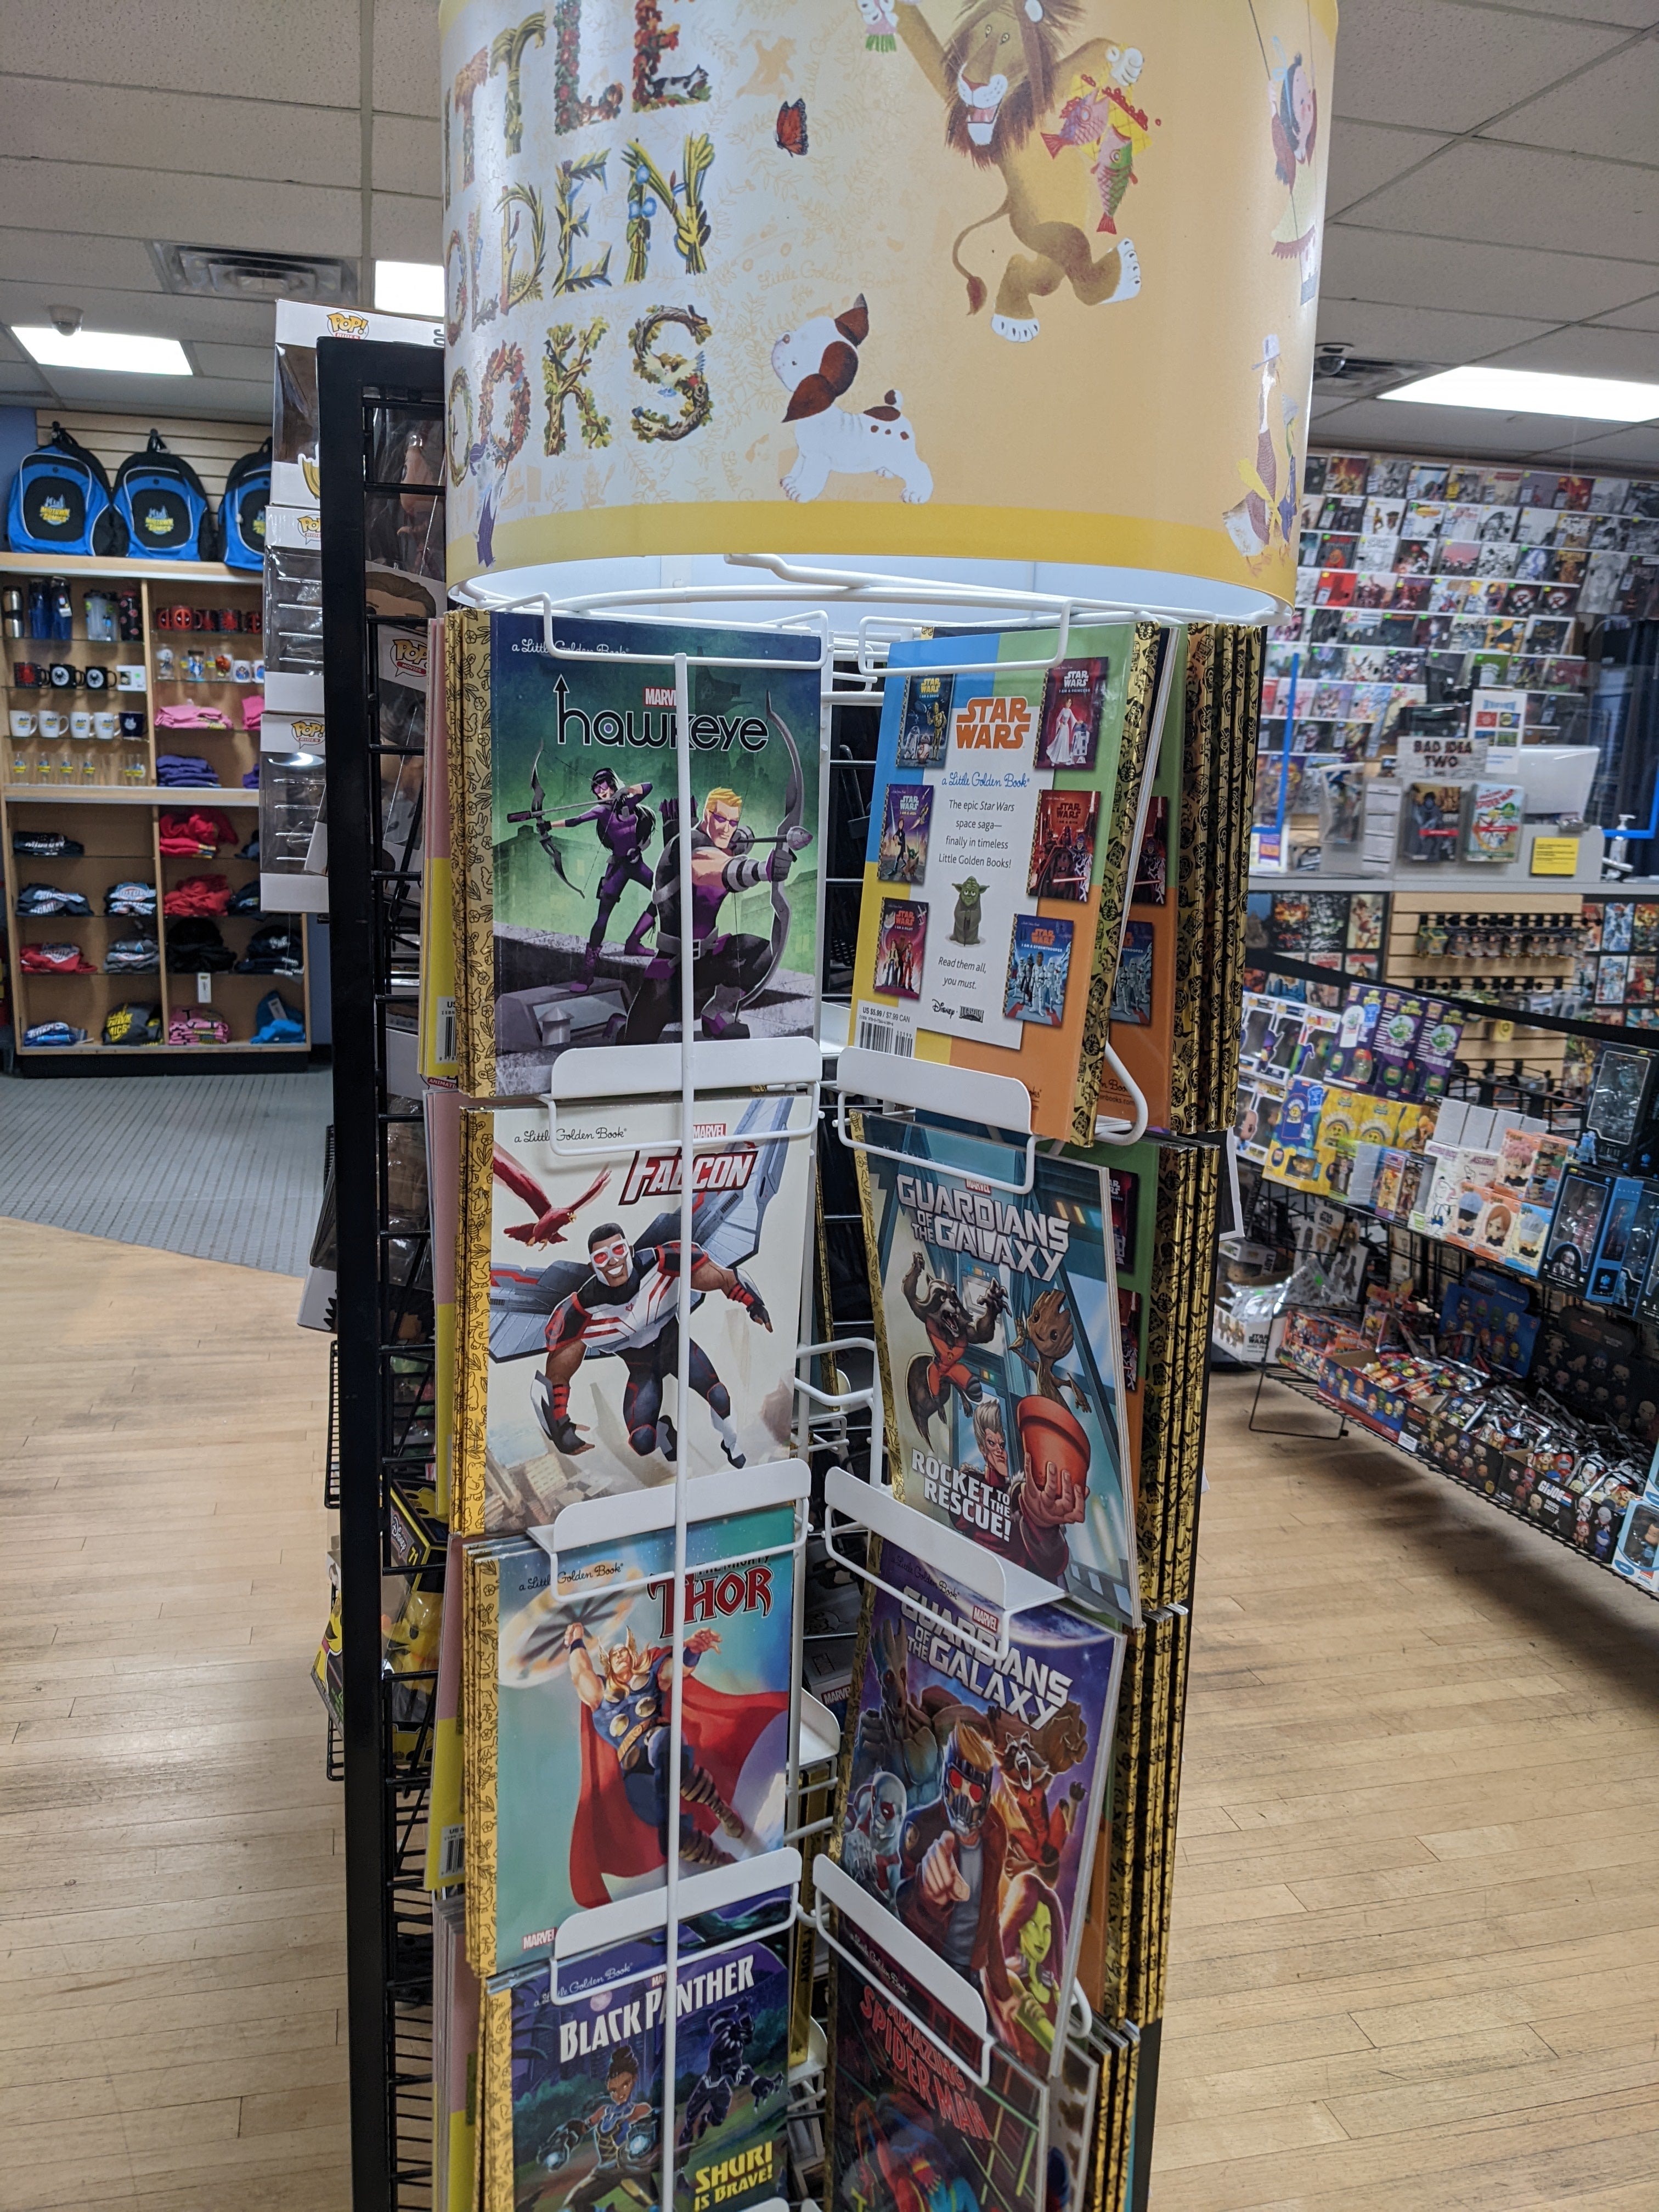 Photograph of a spinner rack featuring Little Golden Books with superheroes on them